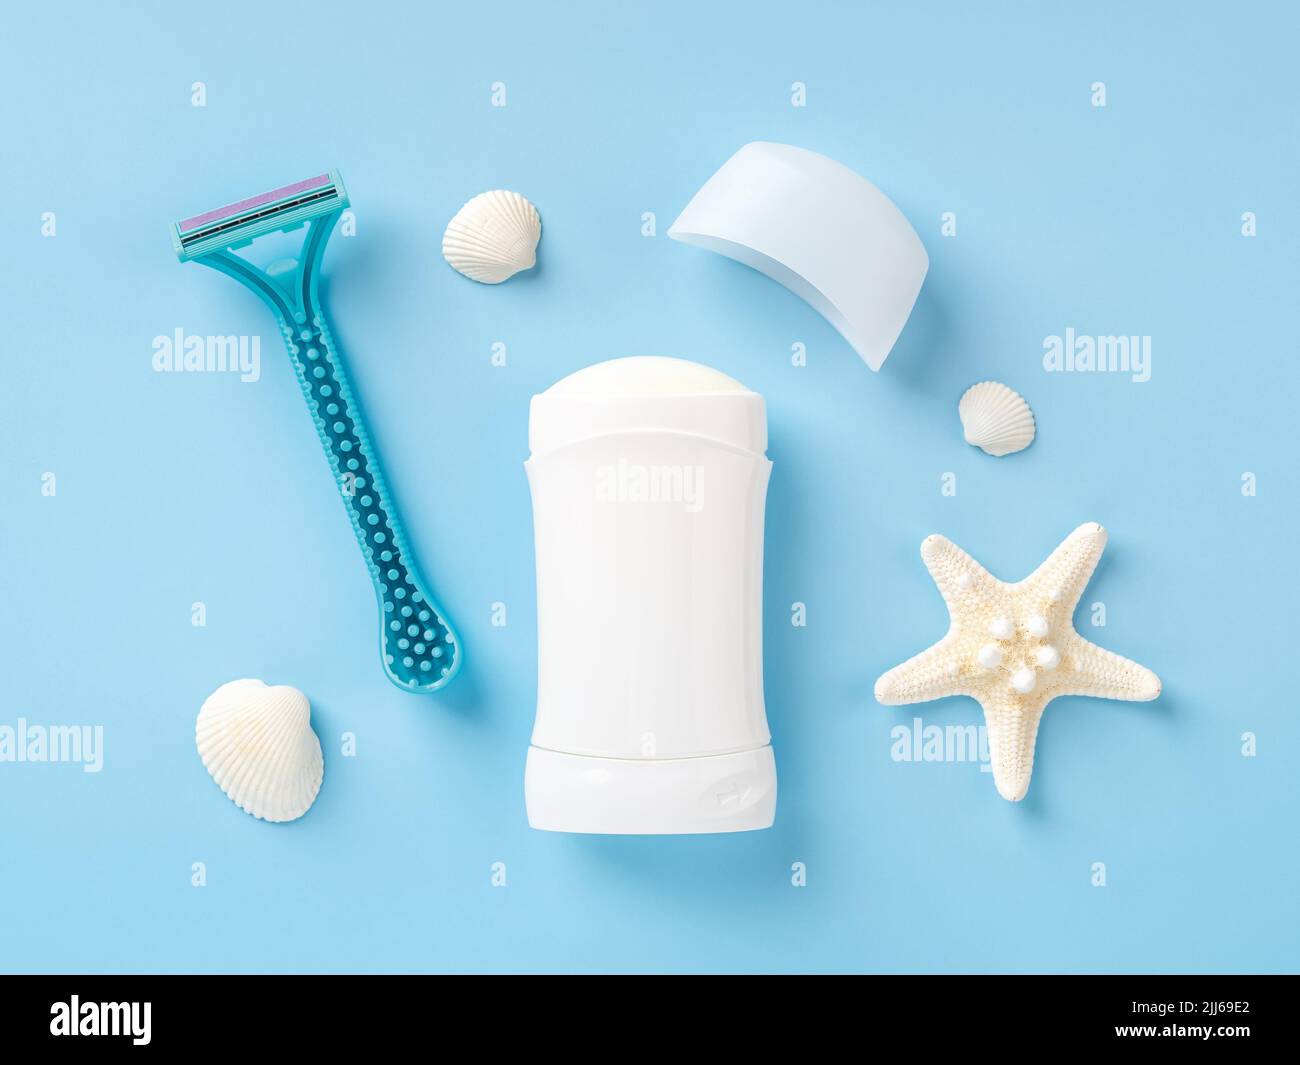 Solid antiperspirant deodorant, disposable shaving razor, sea star and shells against blue background. Purity and personal hygiene items concept. Stock Photo